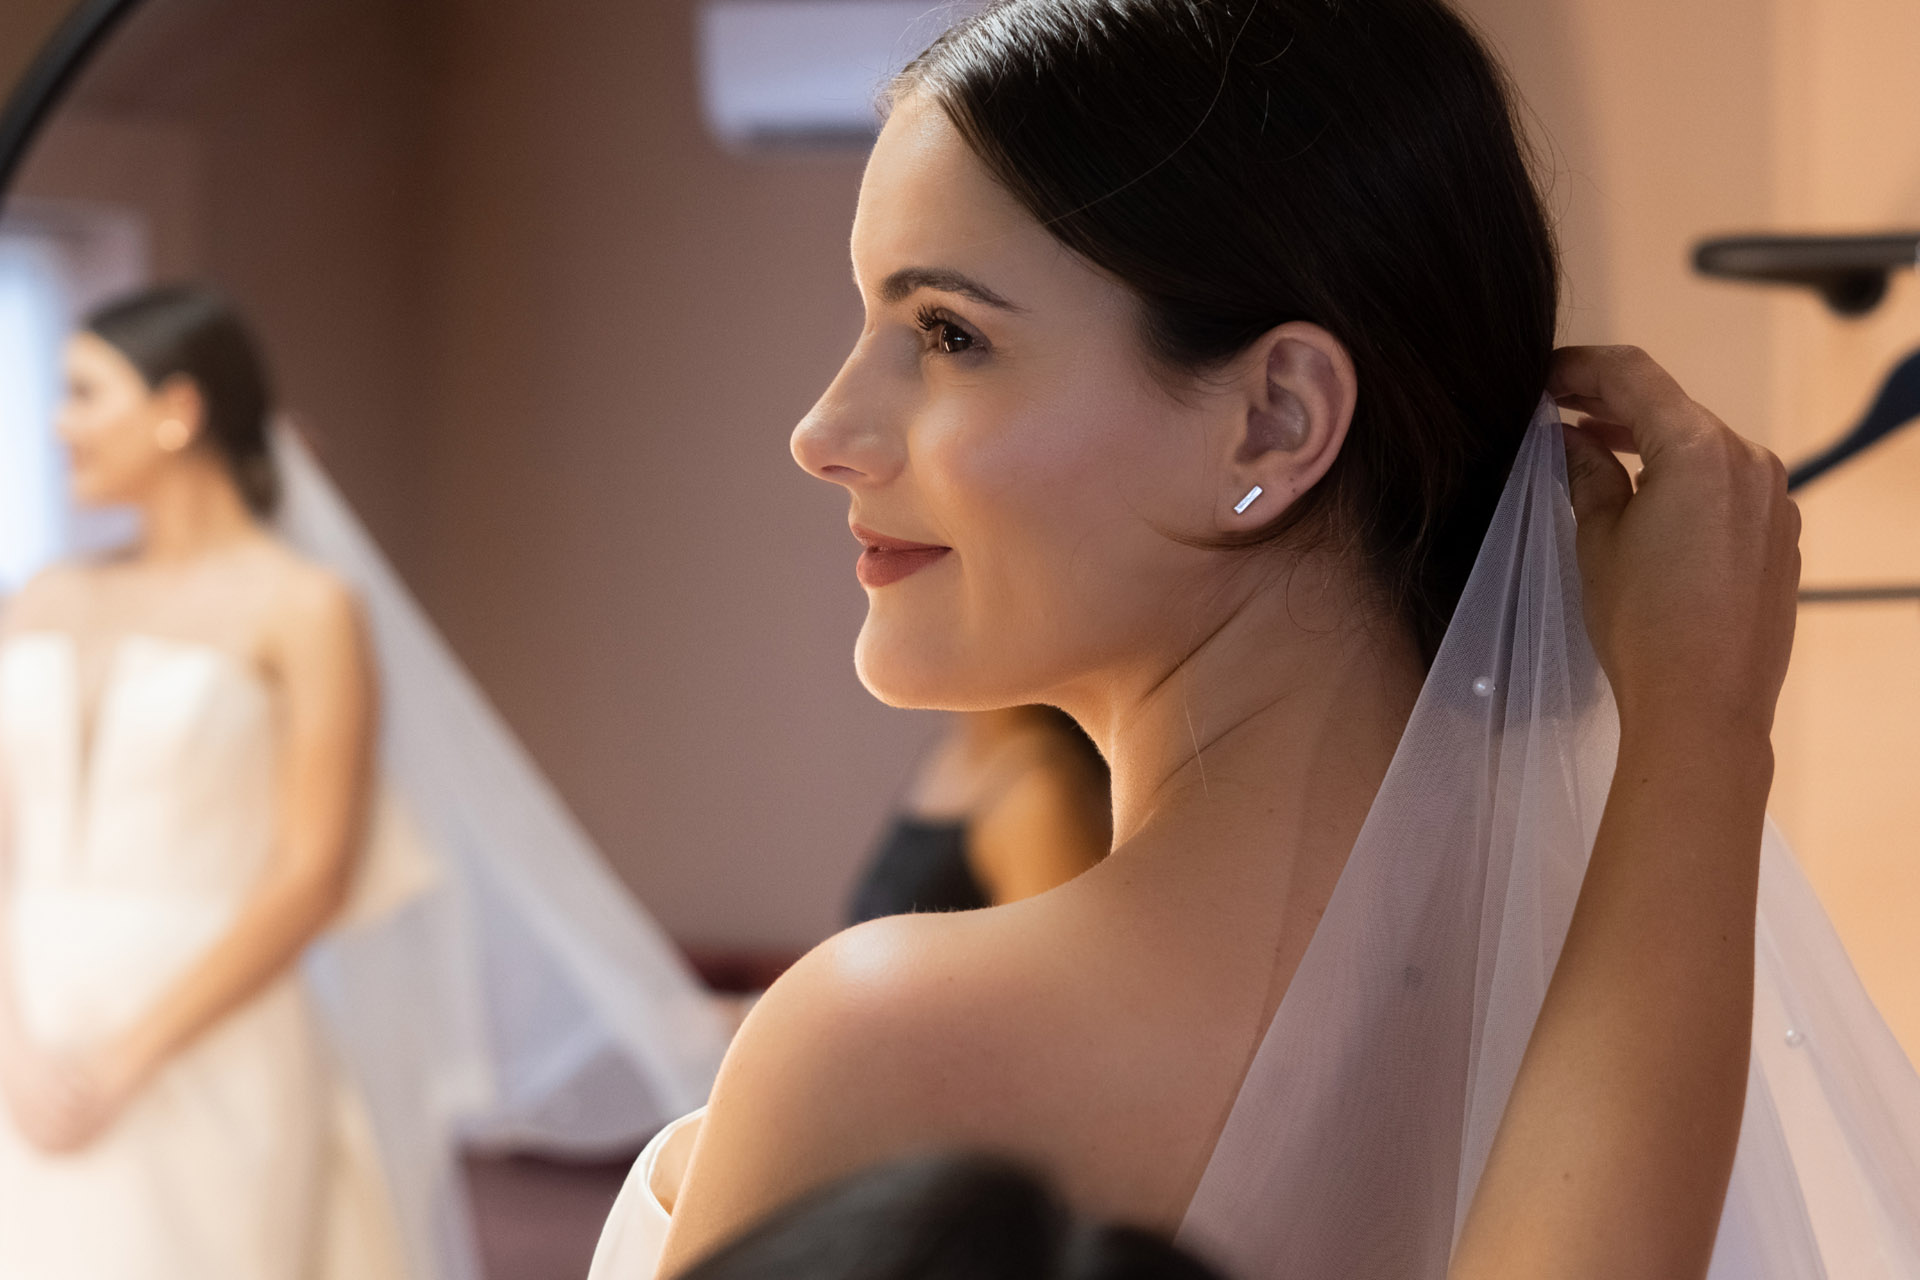 A bride at her wedding with glowing skin